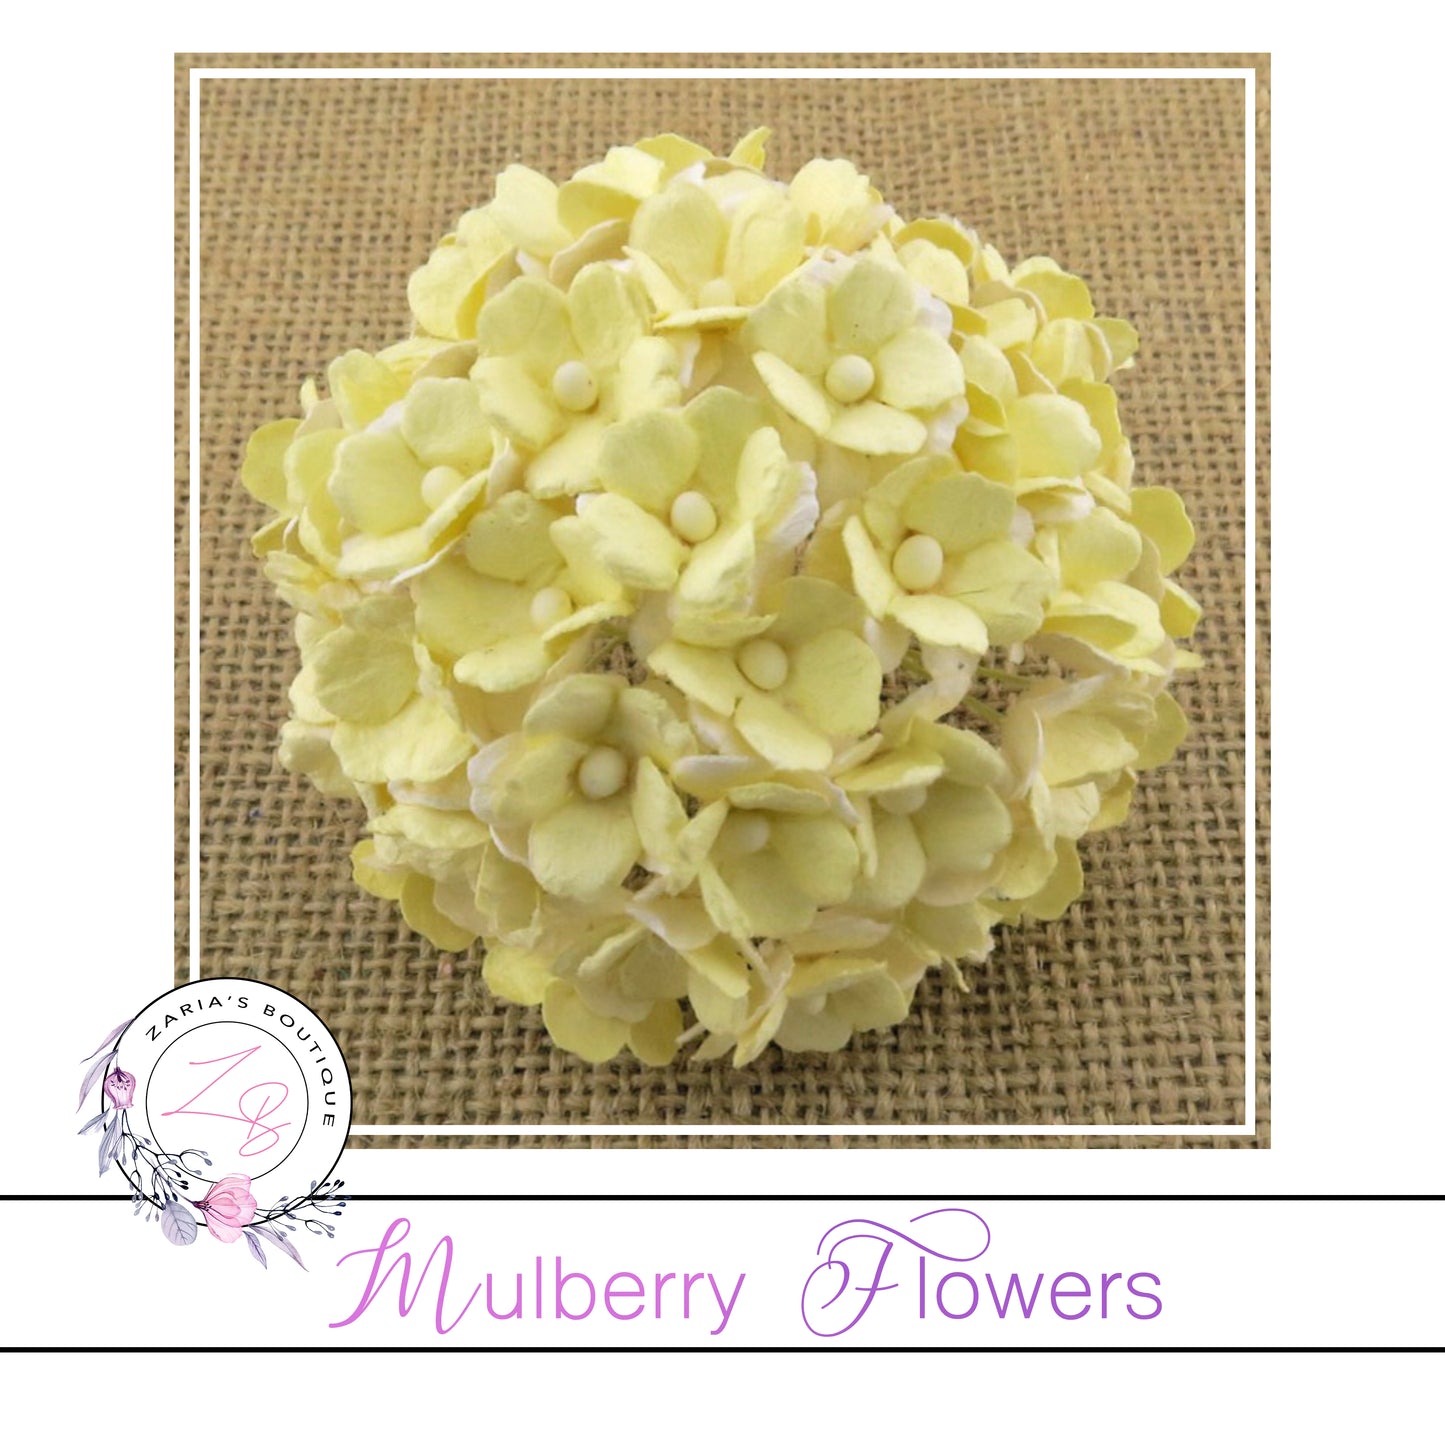 Mulberry Flowers ~ Sweetheart Blossom ~ 2-Tone Pale Yellow ~ 15mm